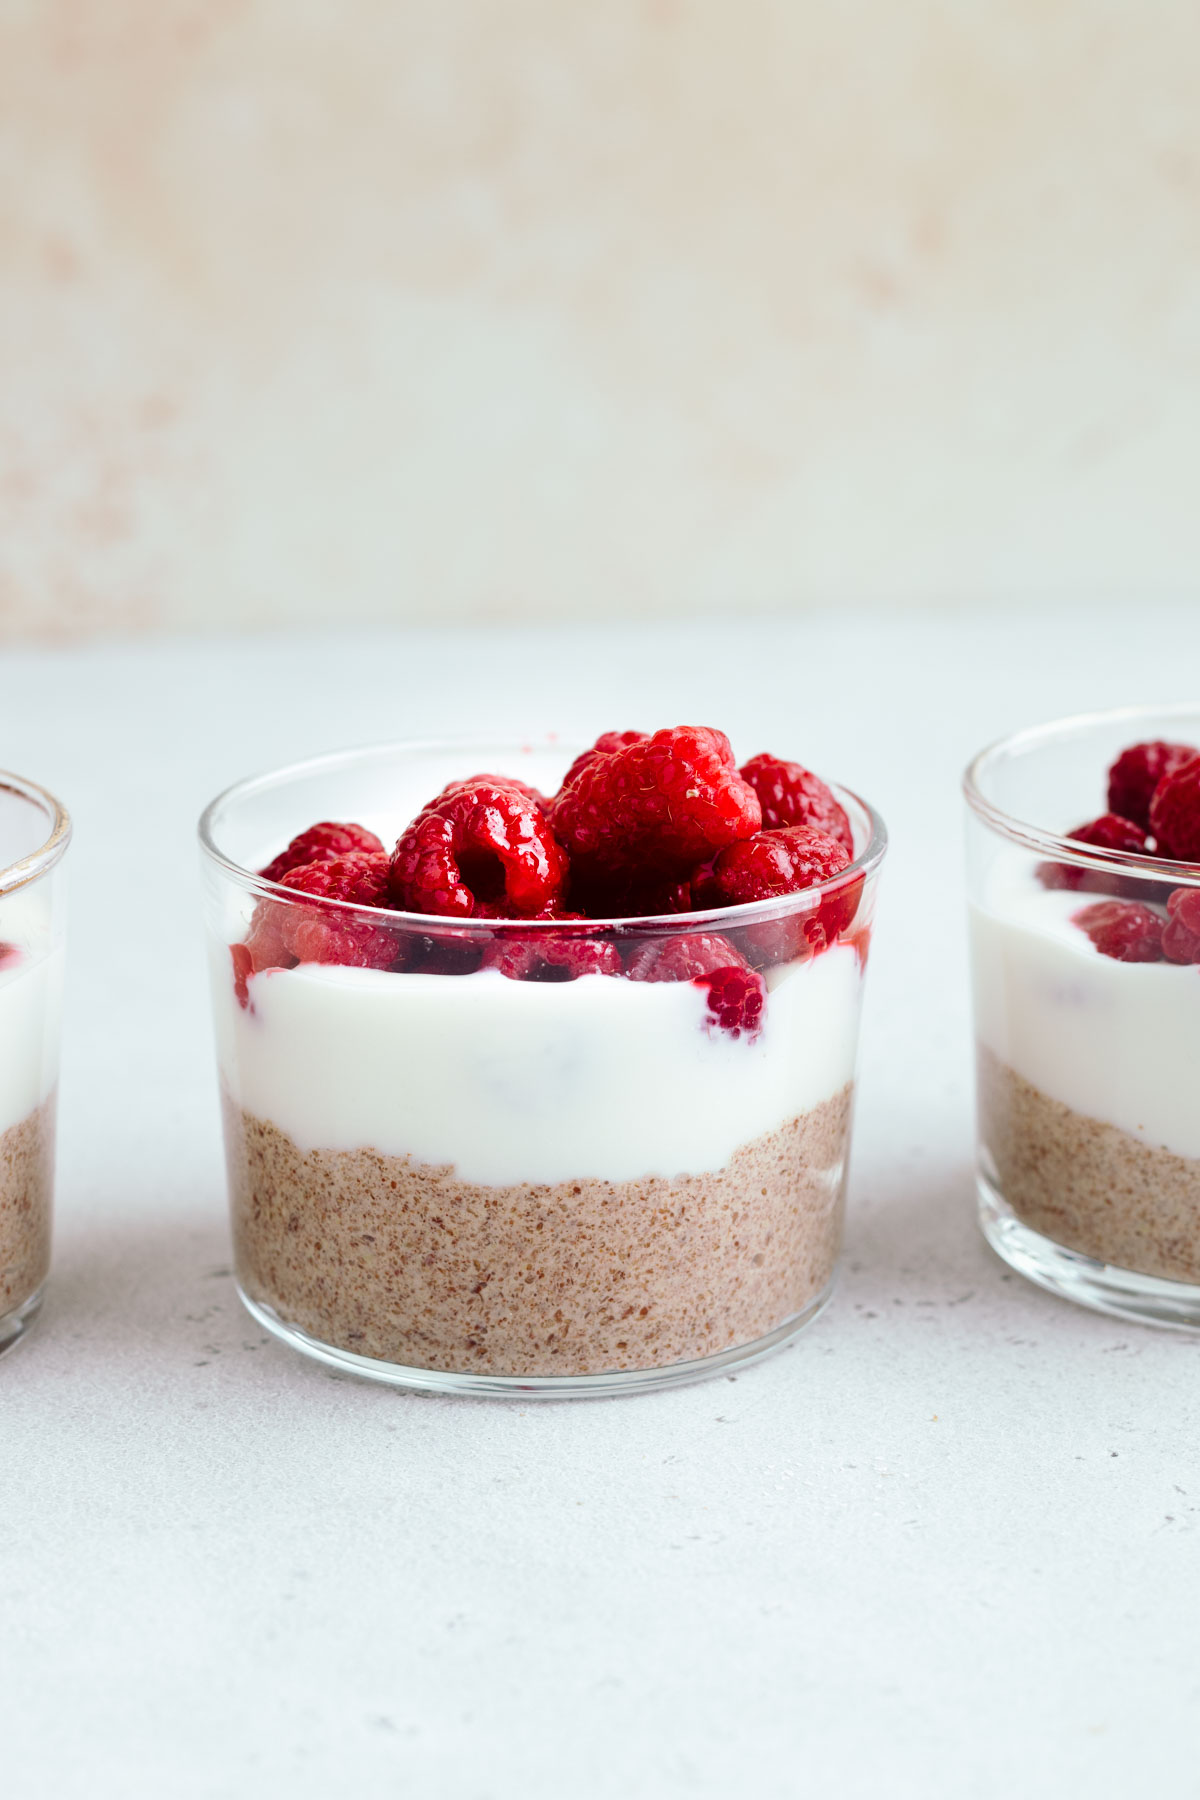 A small glass layered with a light brown pudding, a small layer of white yogurt and fresh raspberries on a light grey backdrop in front of light brown wall next to two small glasses with pudding.